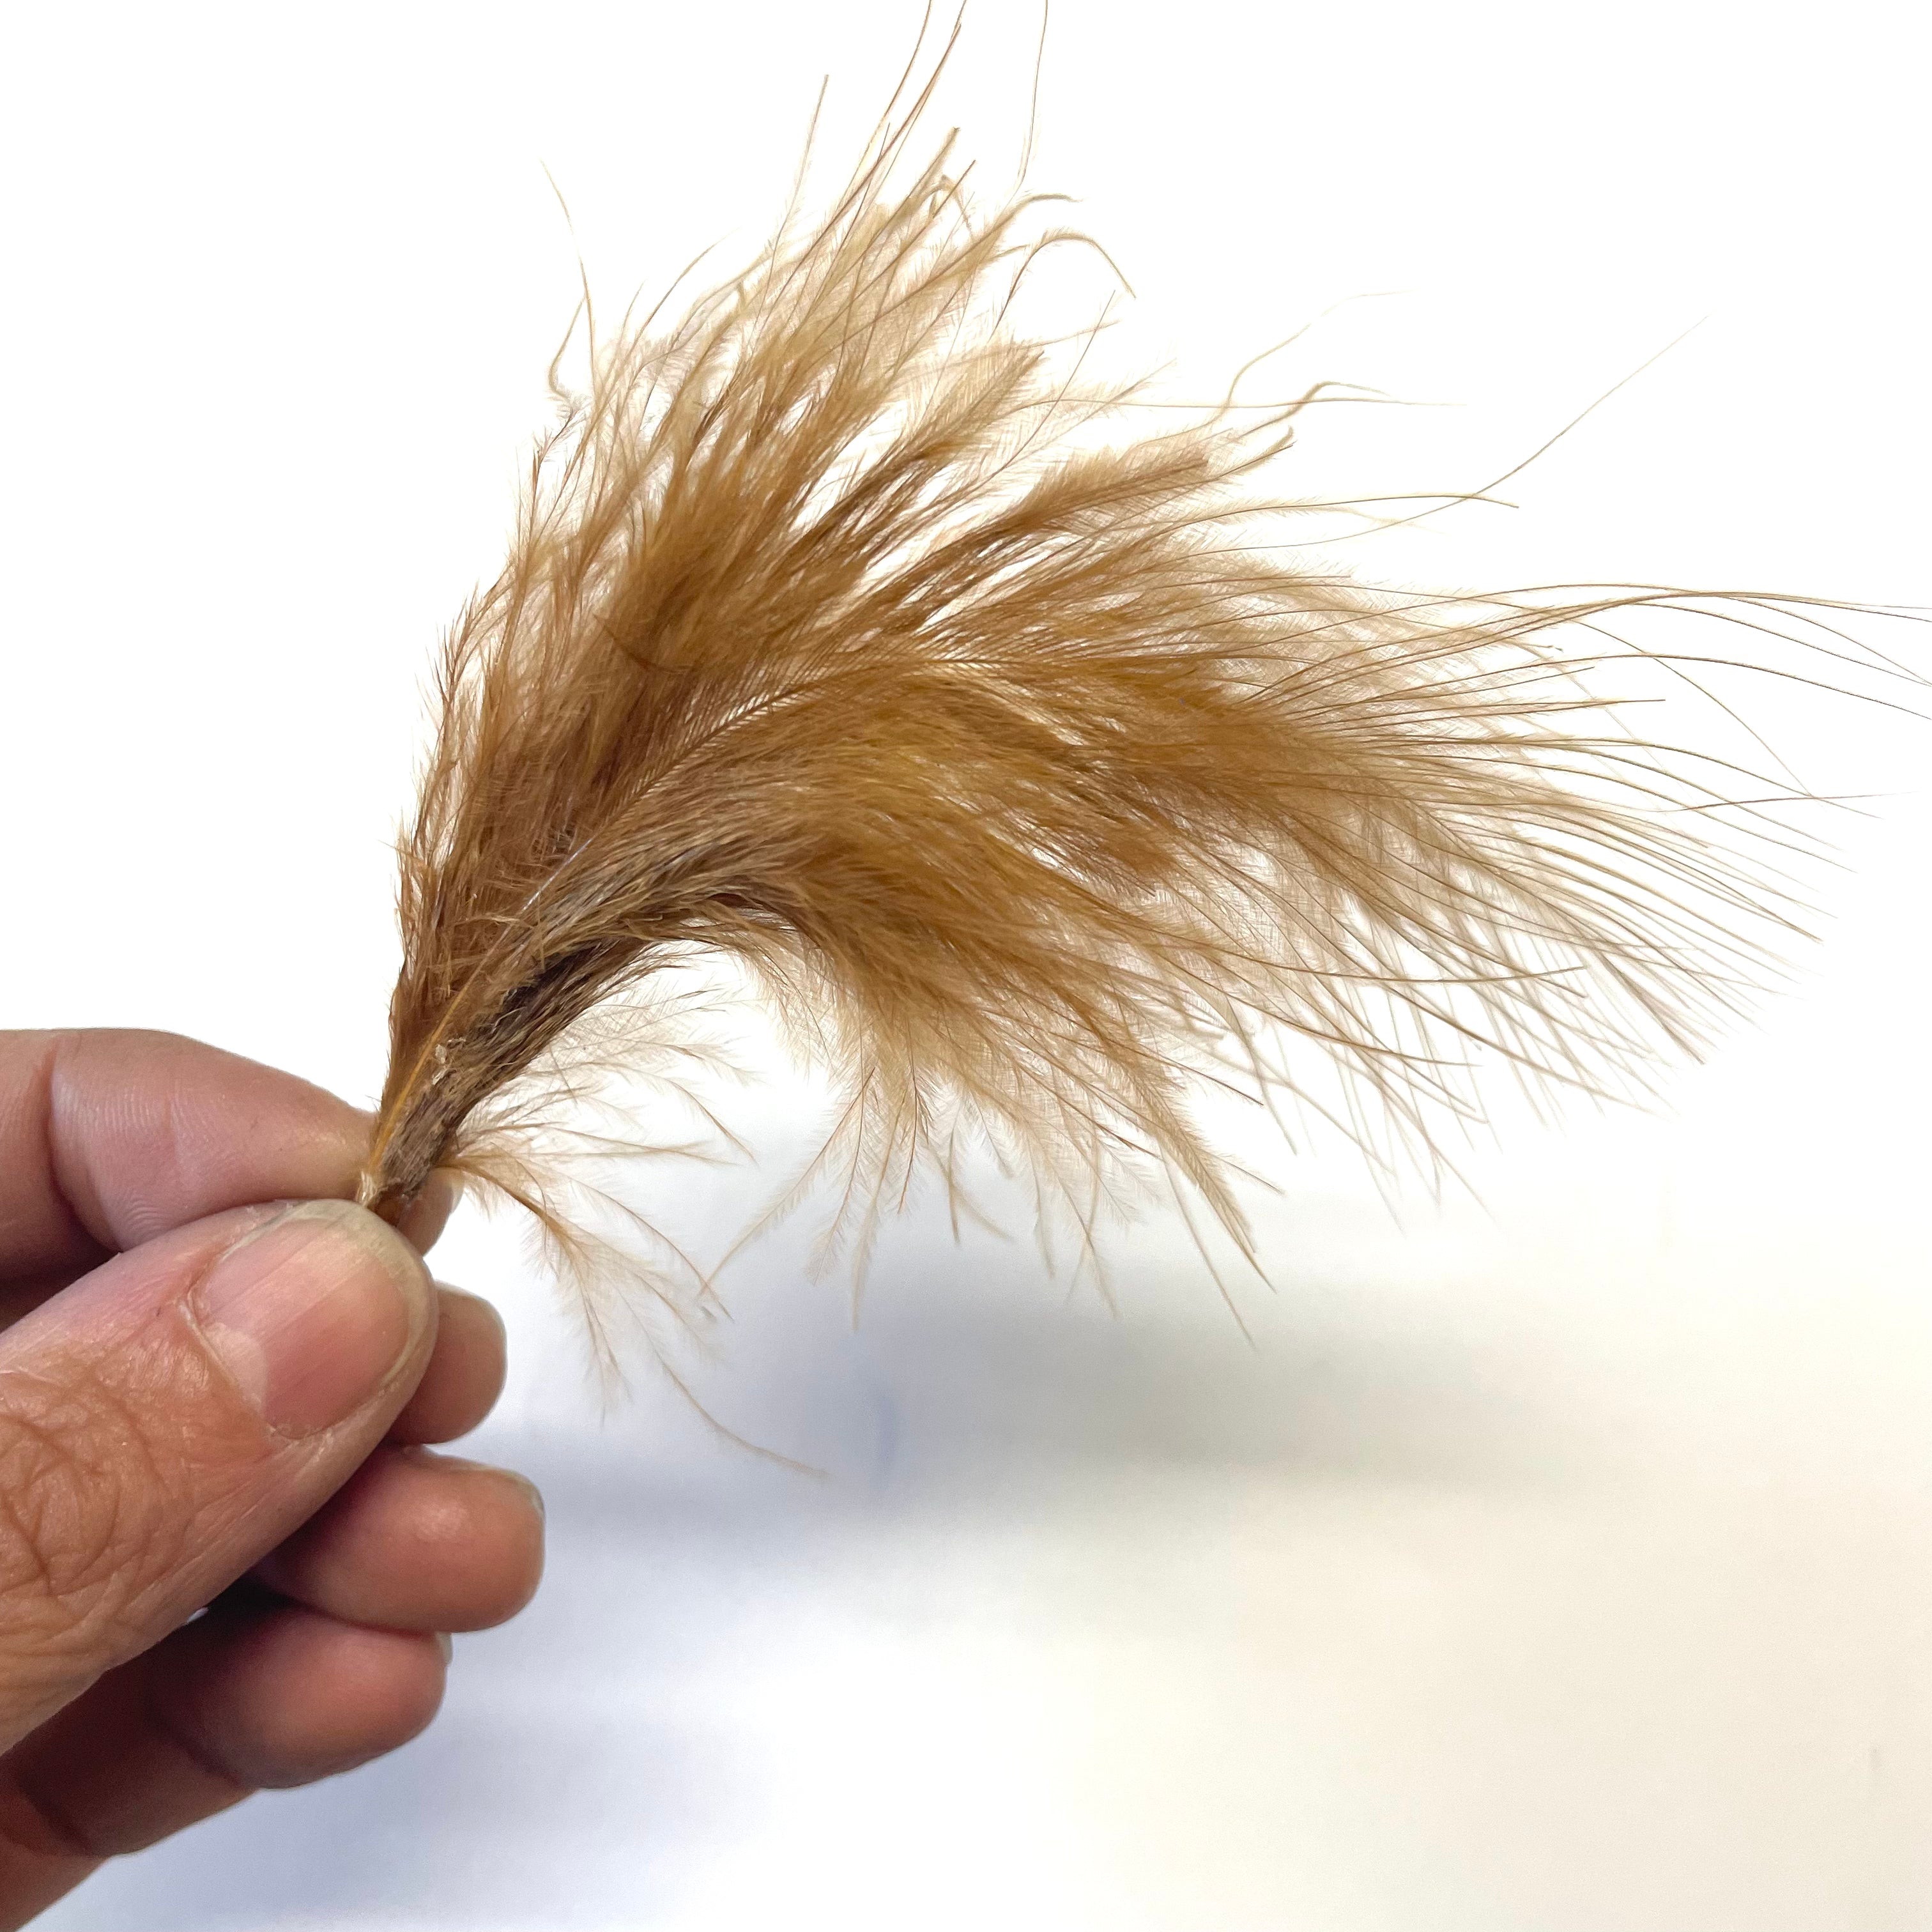 Itty Bitty Marabou Feather Plumage Pack 10 grams - Tan Brown